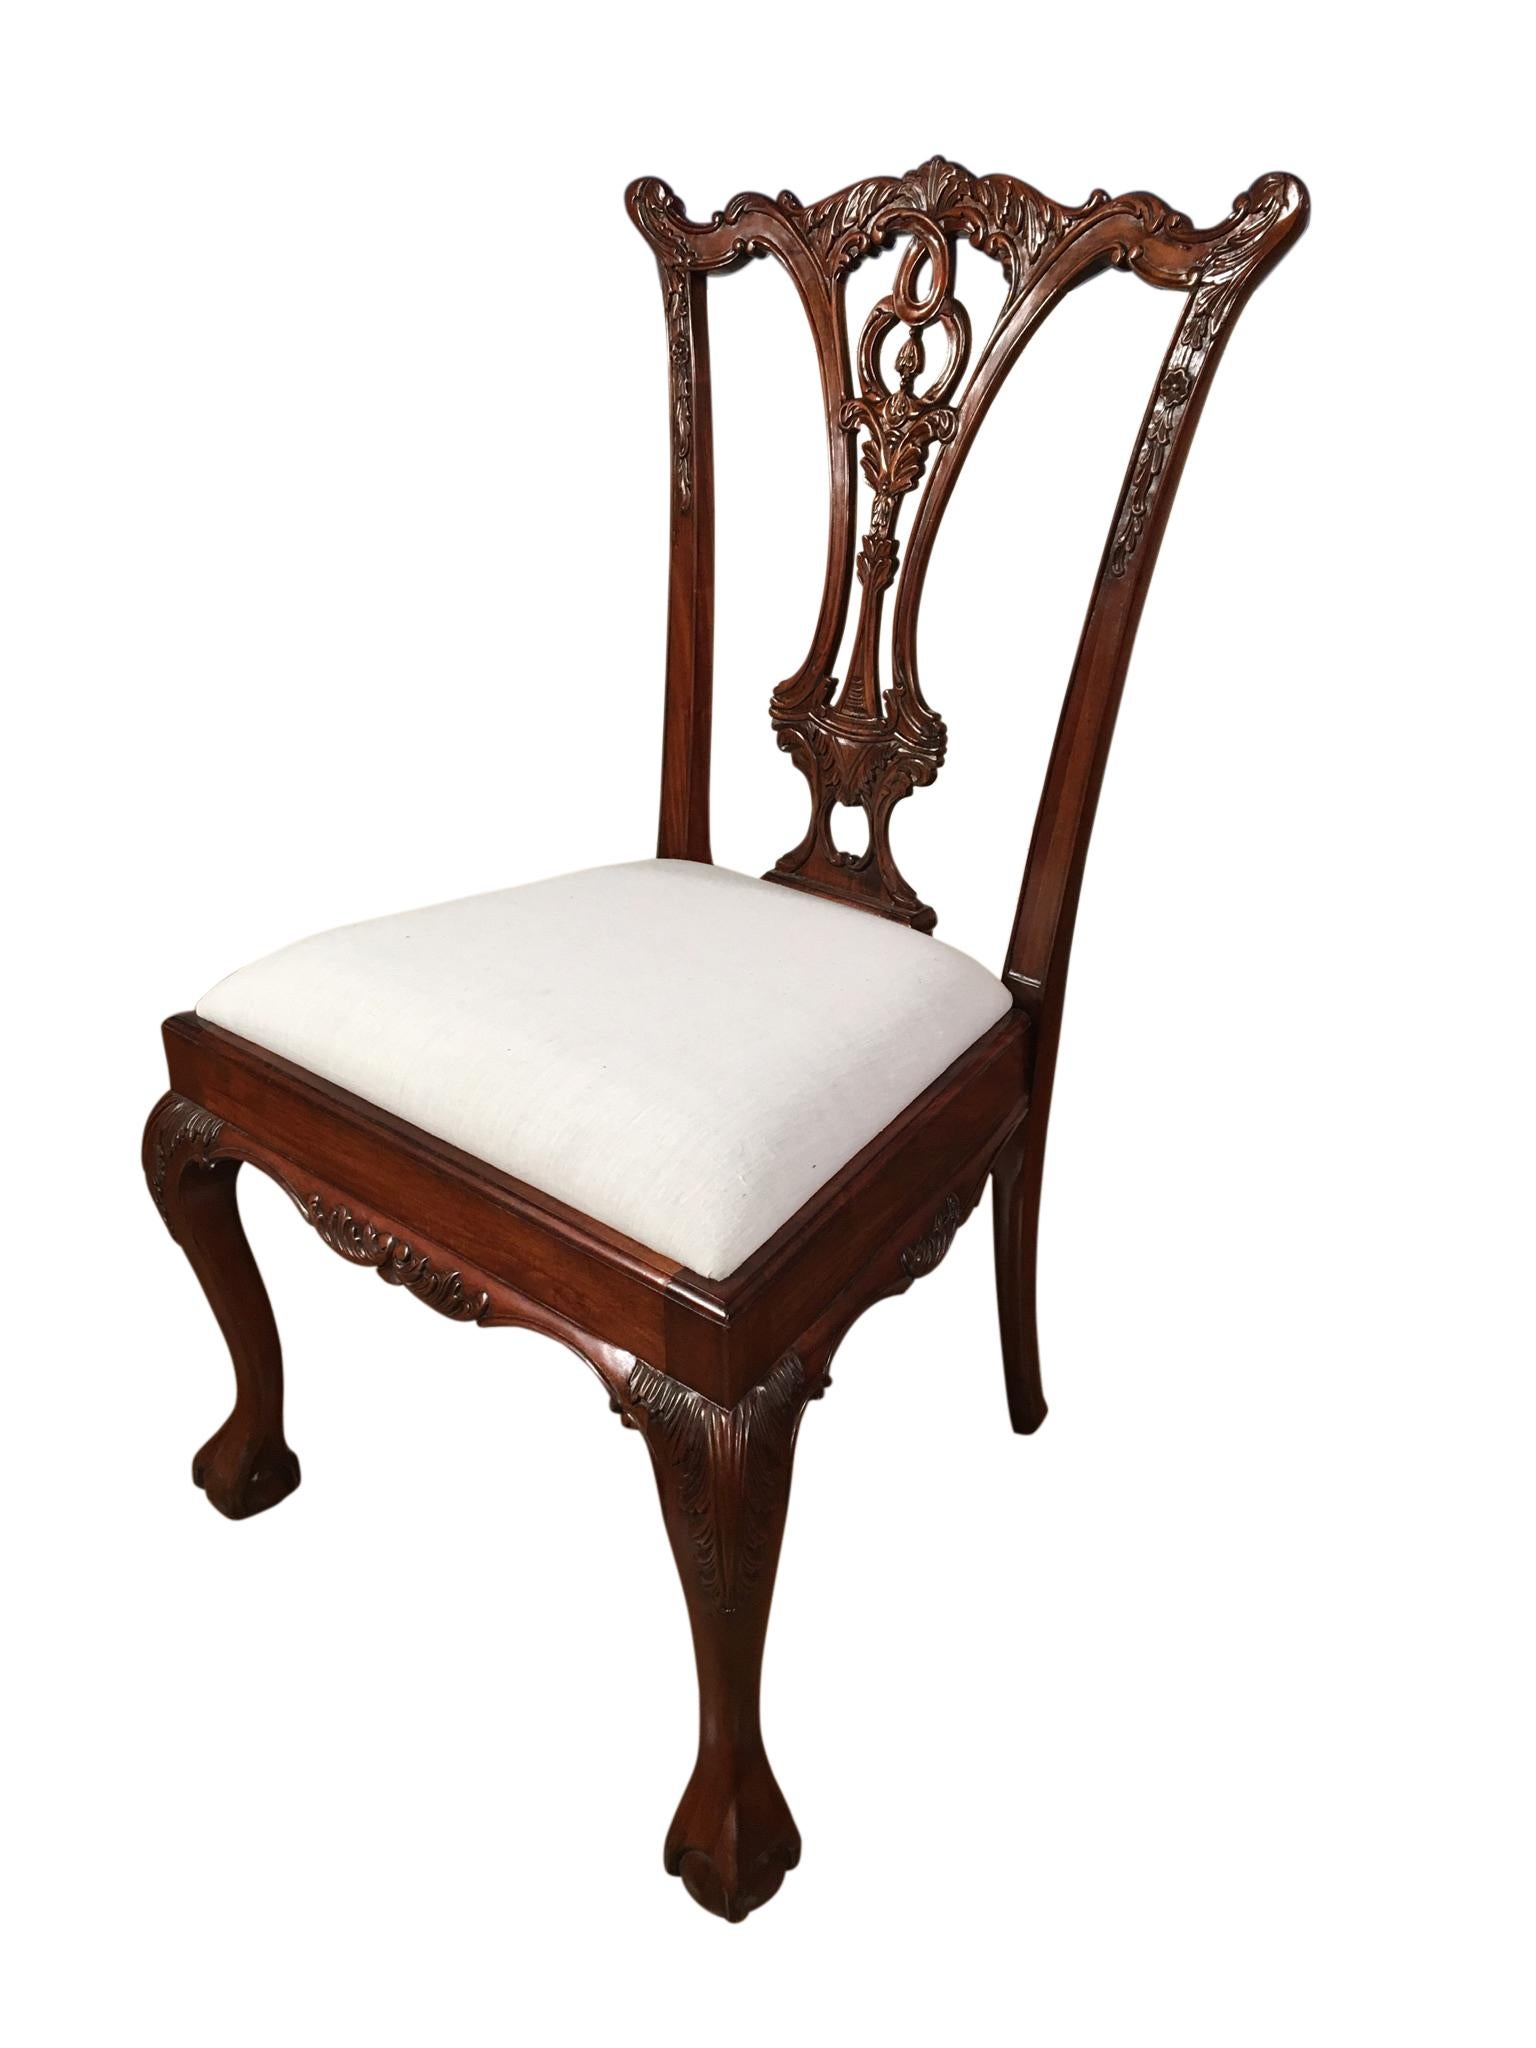 Eight New Mahogany Chippendale Ball and Claw Dining Chairs by Leighton Hall For Sale 2